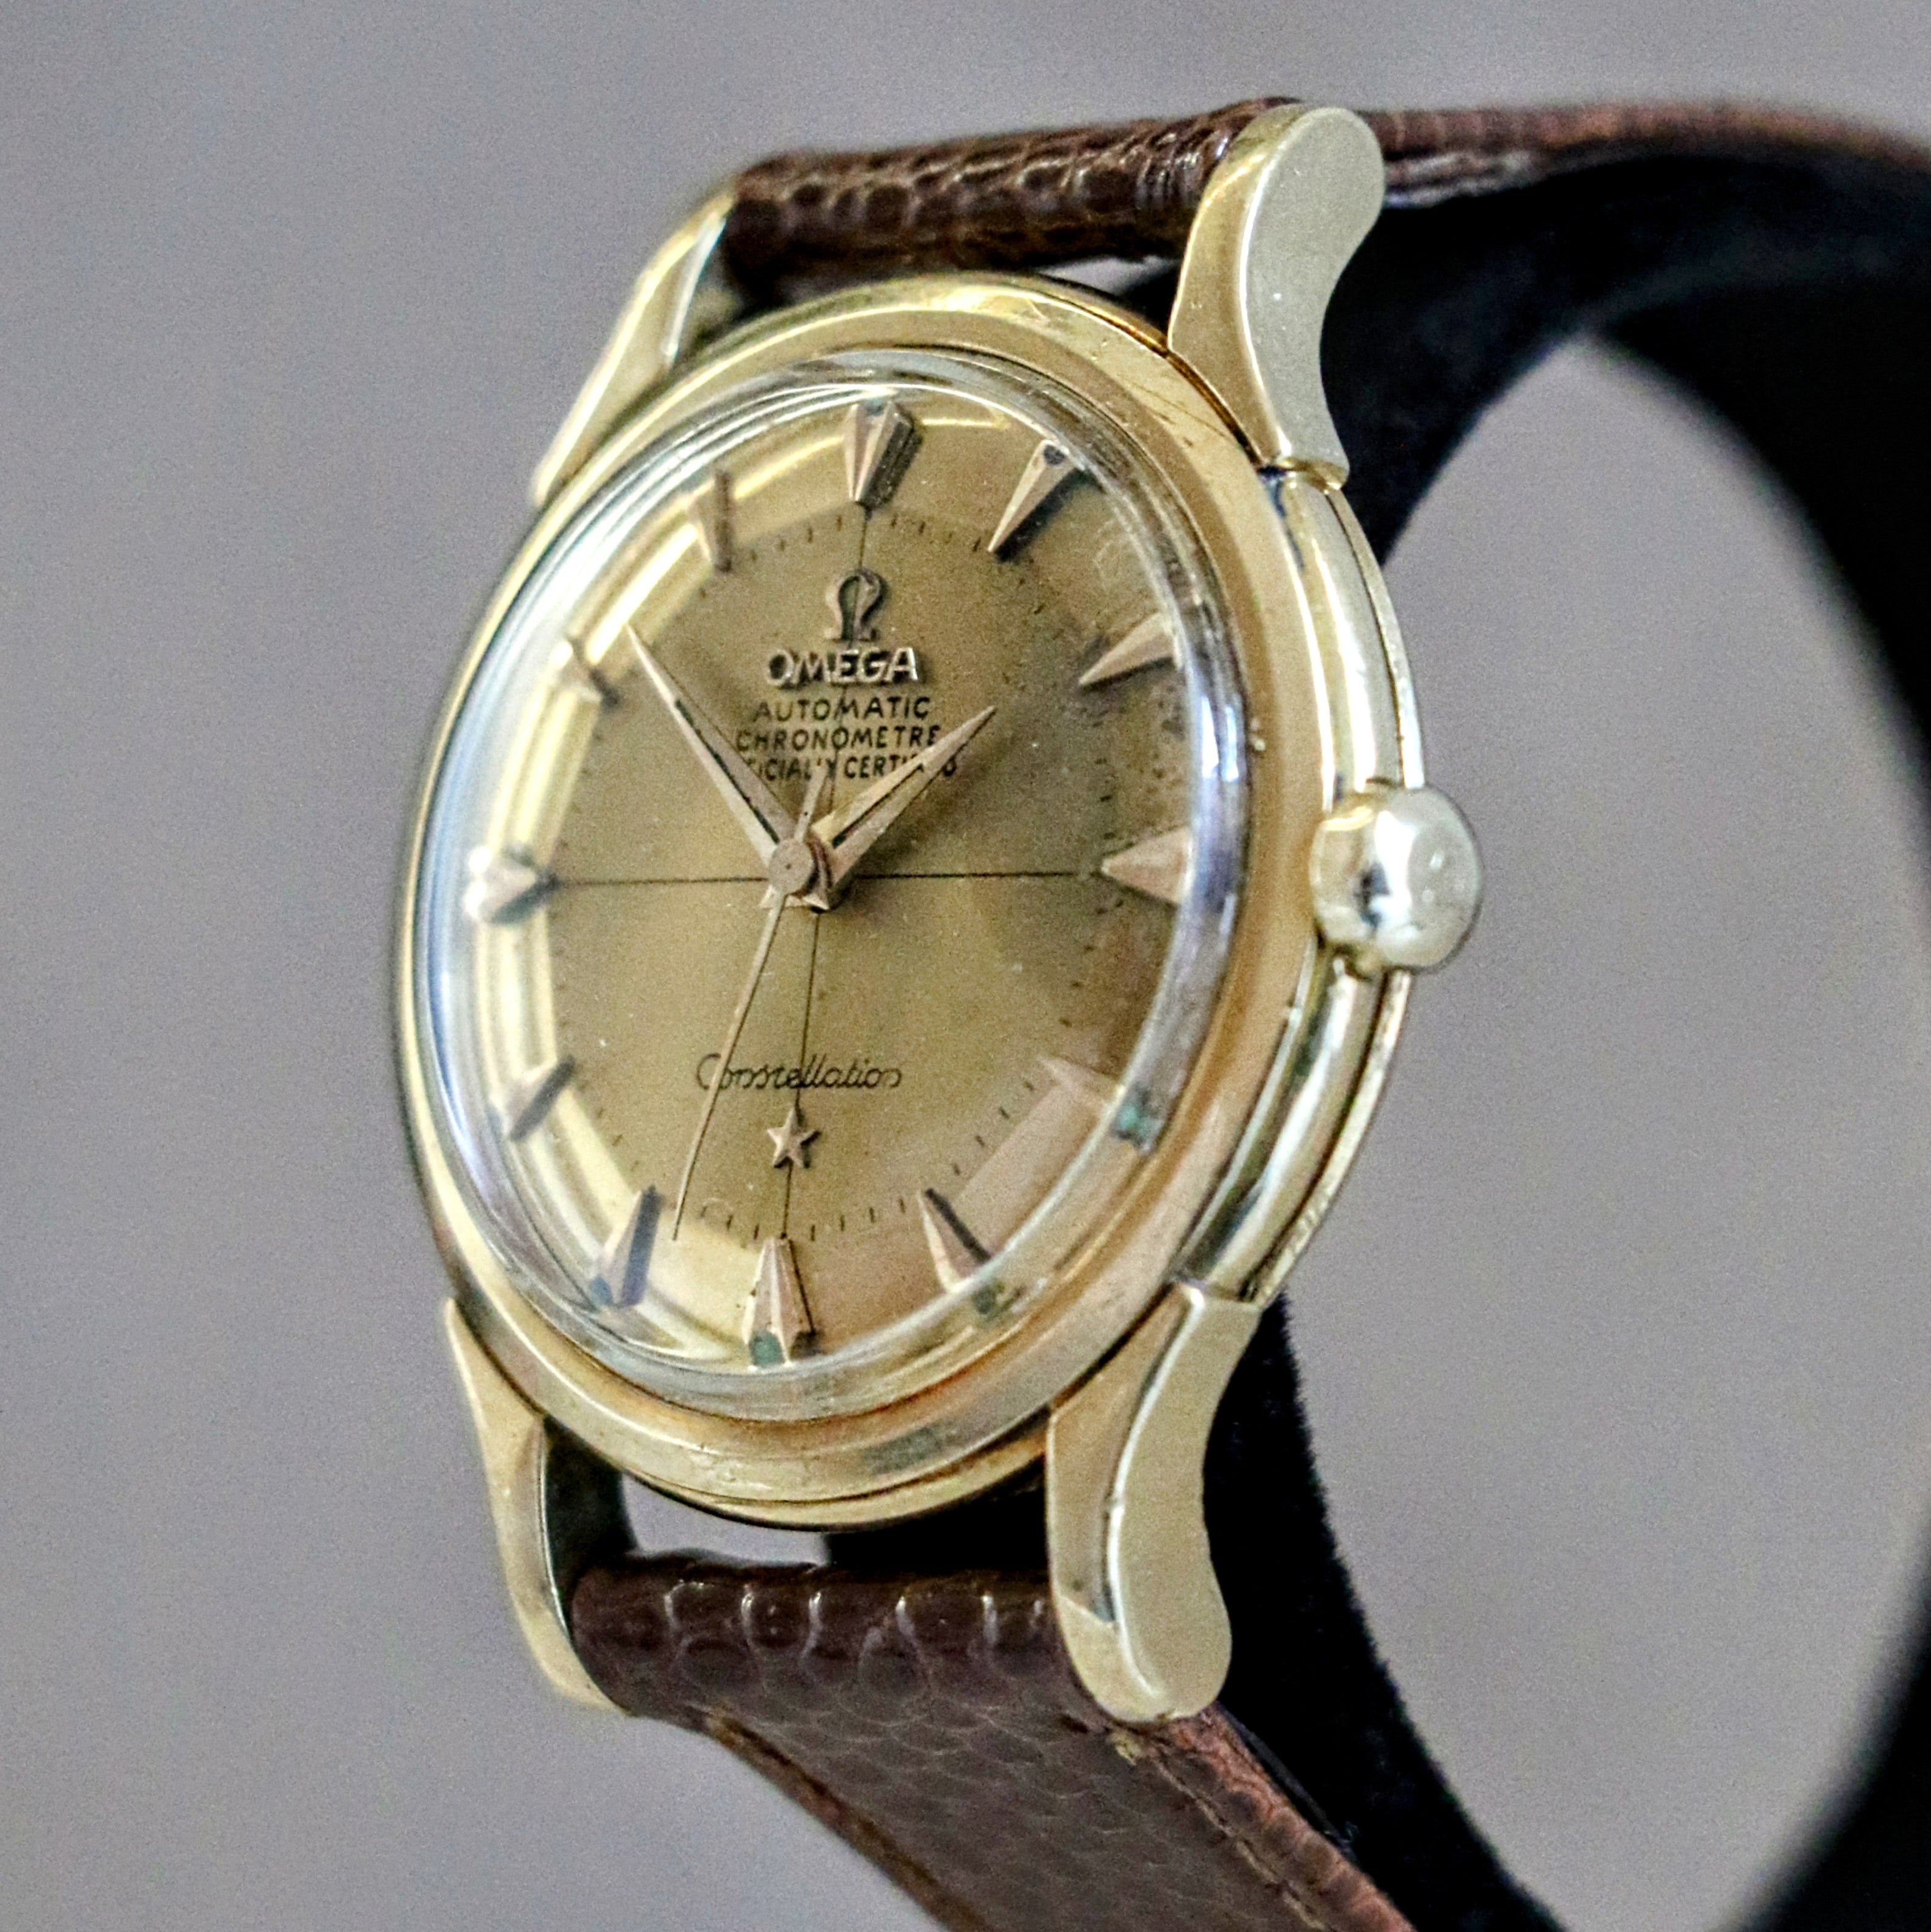 OMEGA Constellation 18K Gold Wristwatch Automatic Chronometre Officially Certified Watch Ref. 2852 2853